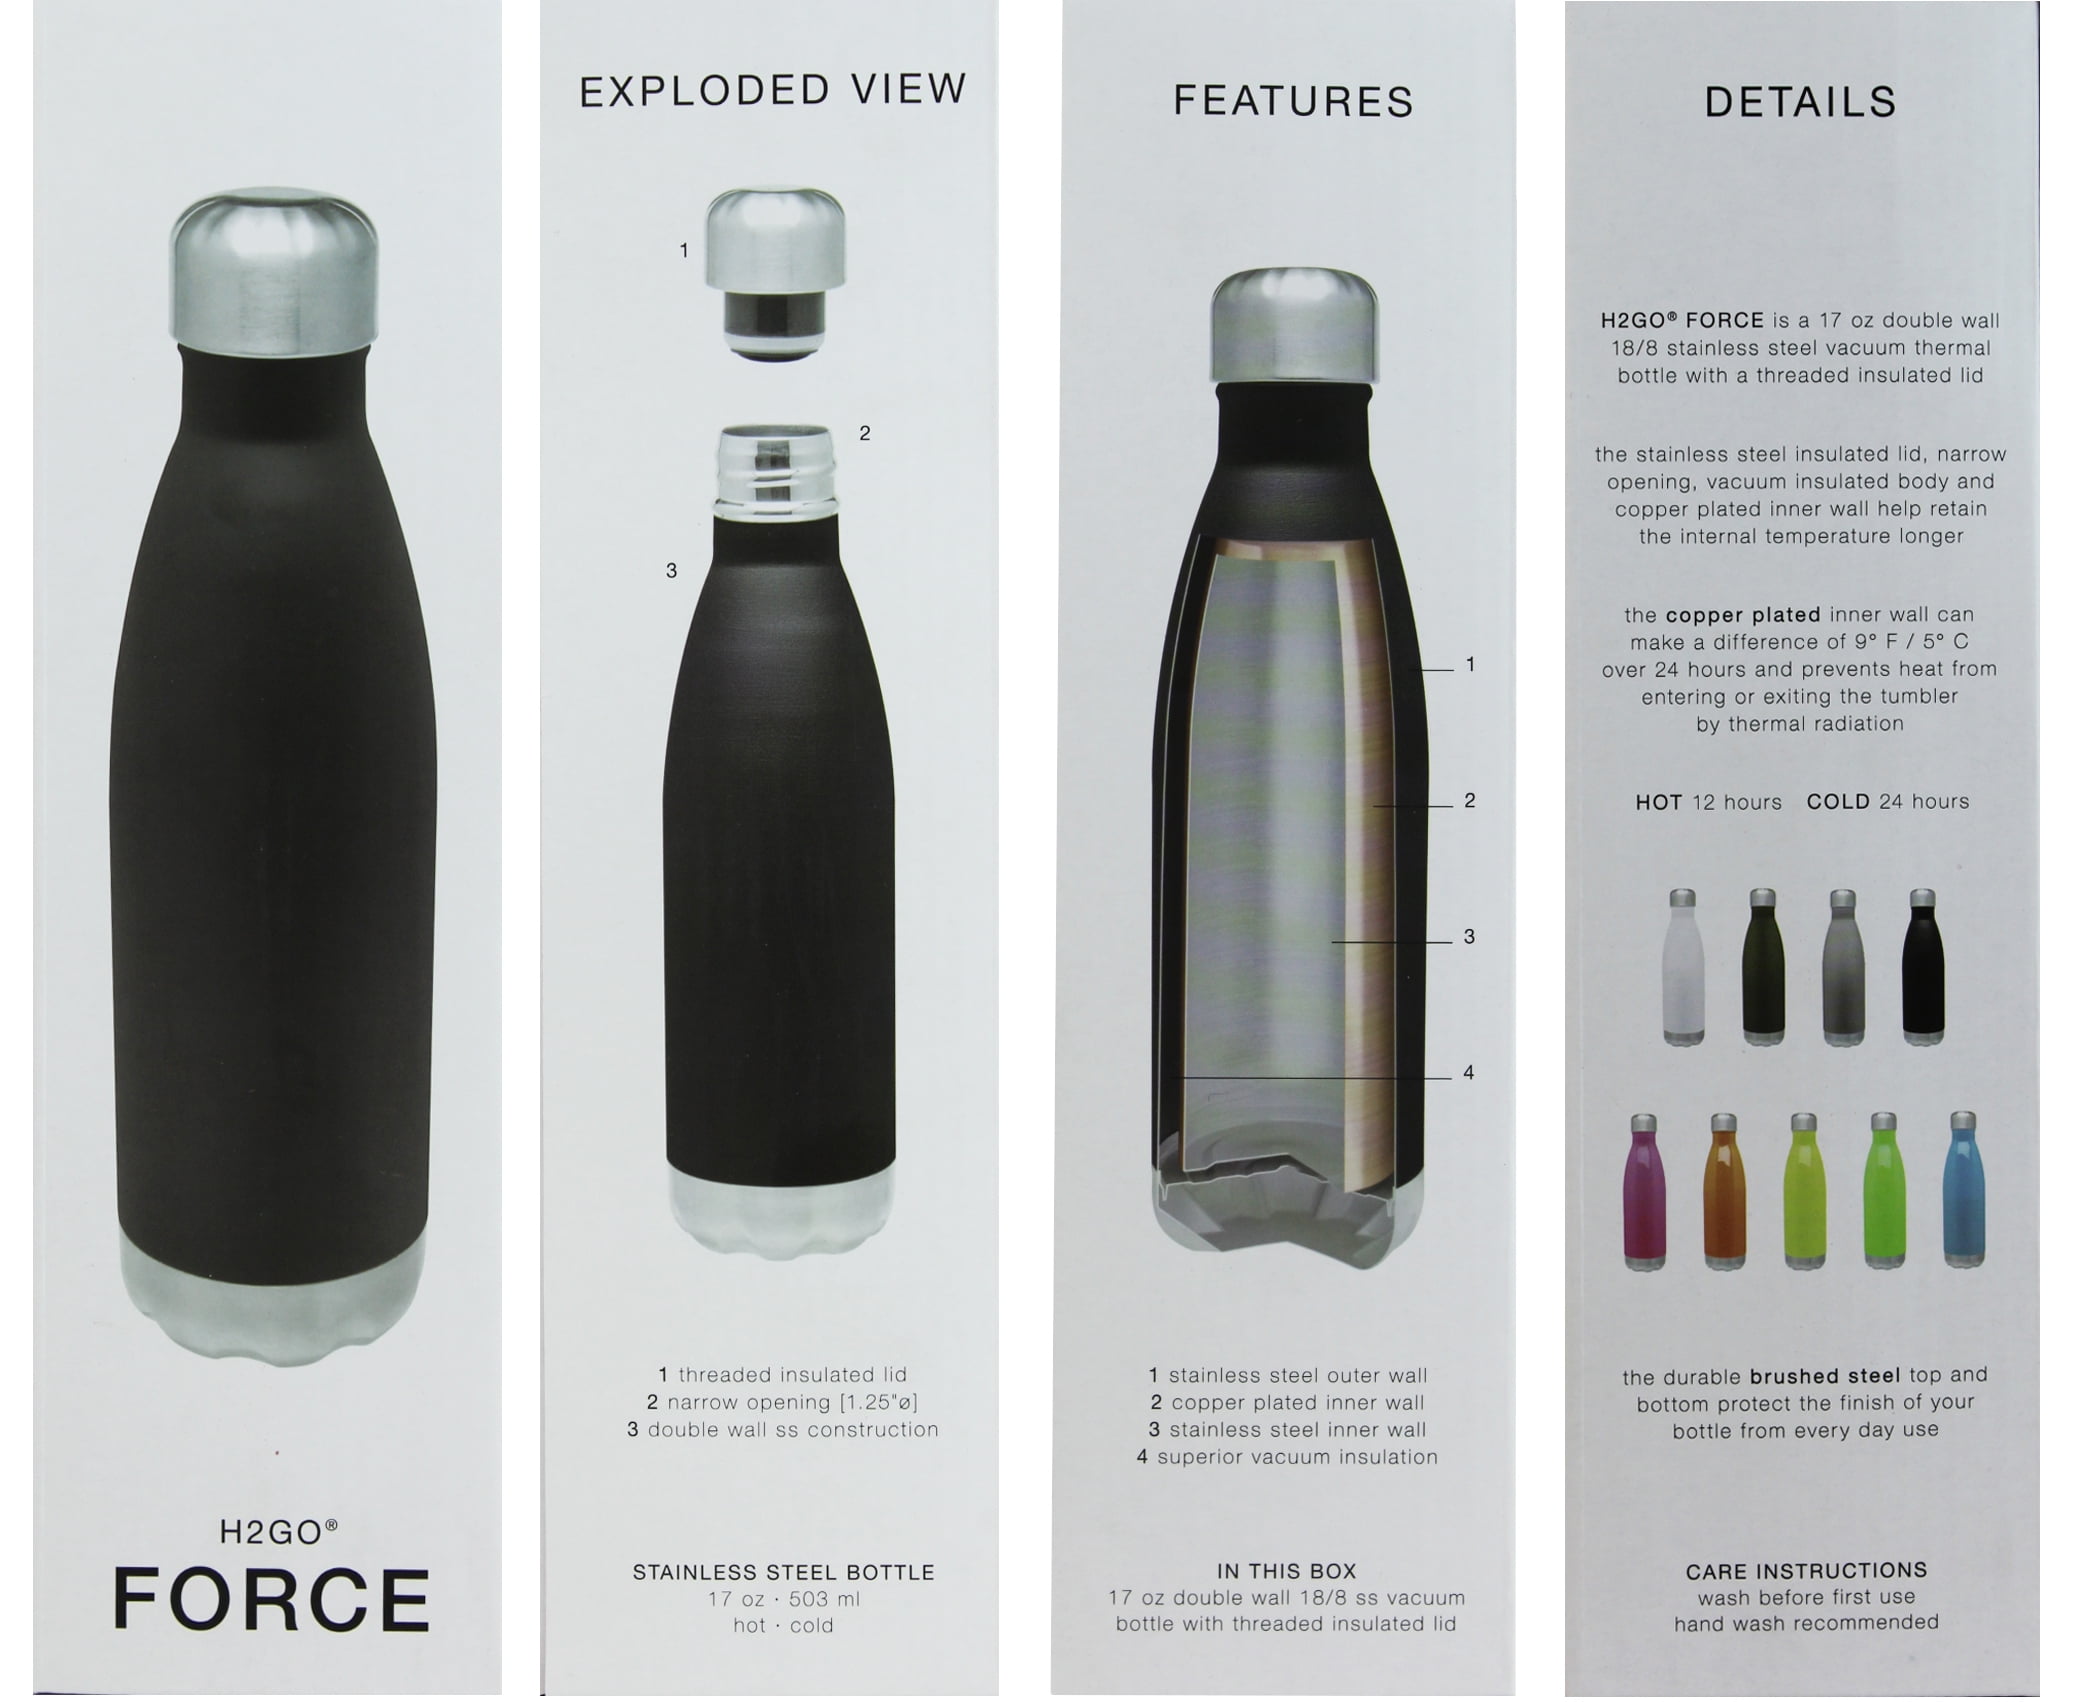 New H2GO Force Stainless Steel 17 oz. Double Wall Vacuum Thermal Bottle